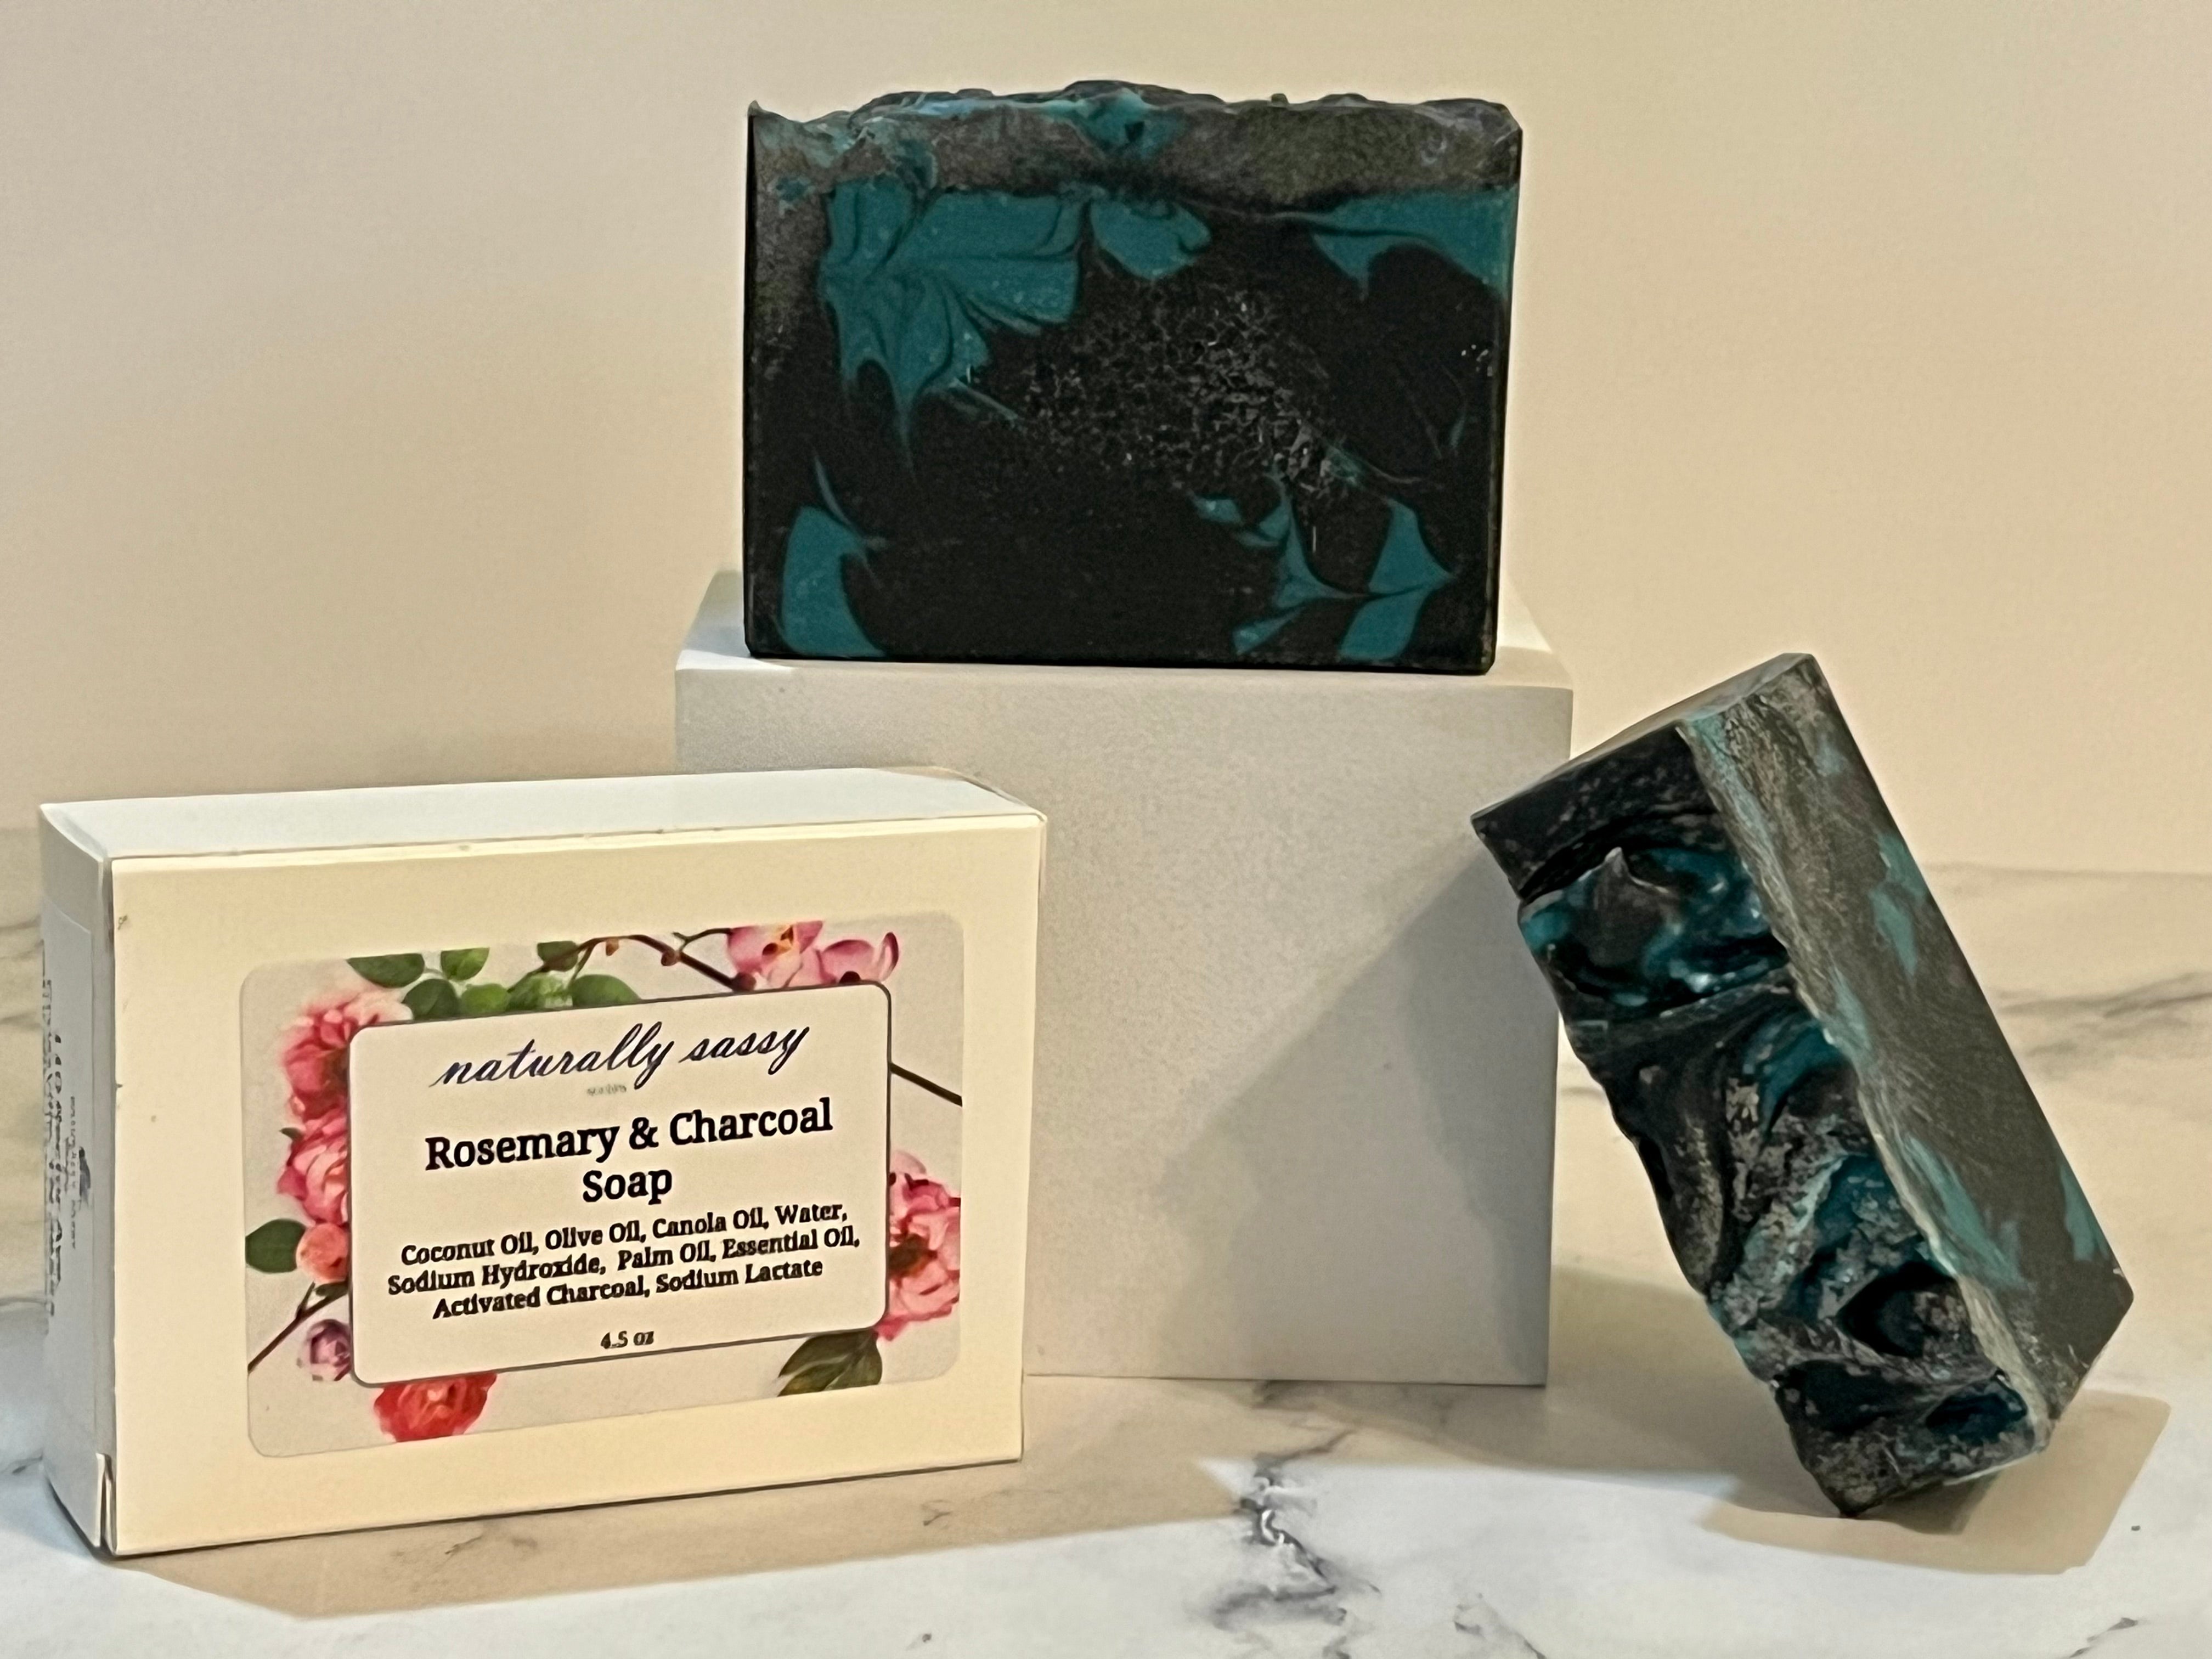 Rosemary and Charcoal Facial Soap